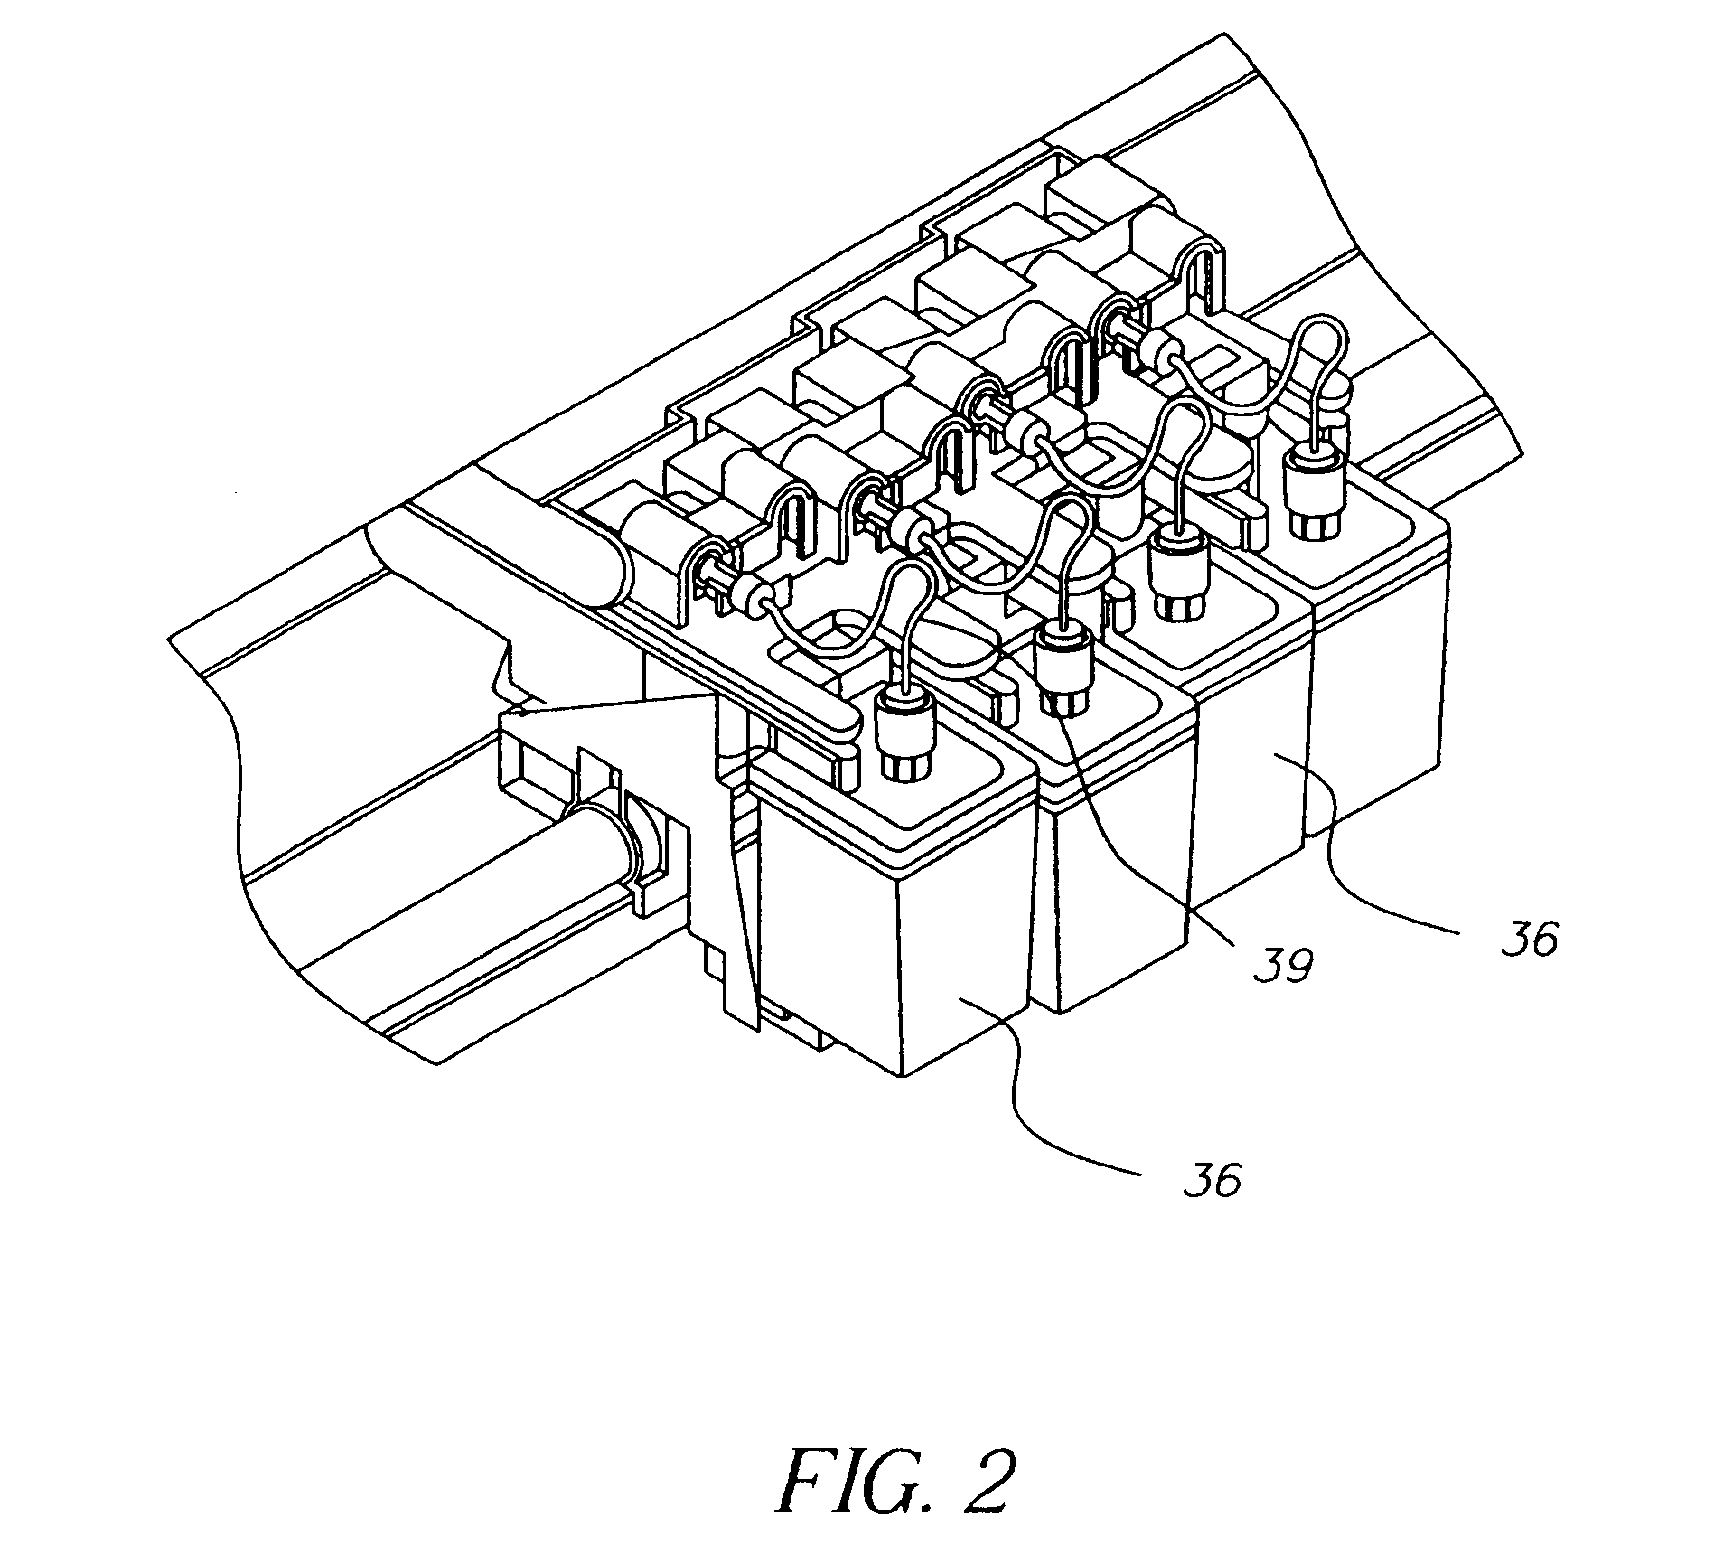 Apparatus and method of inkjet printing on untreated hydrophobic media